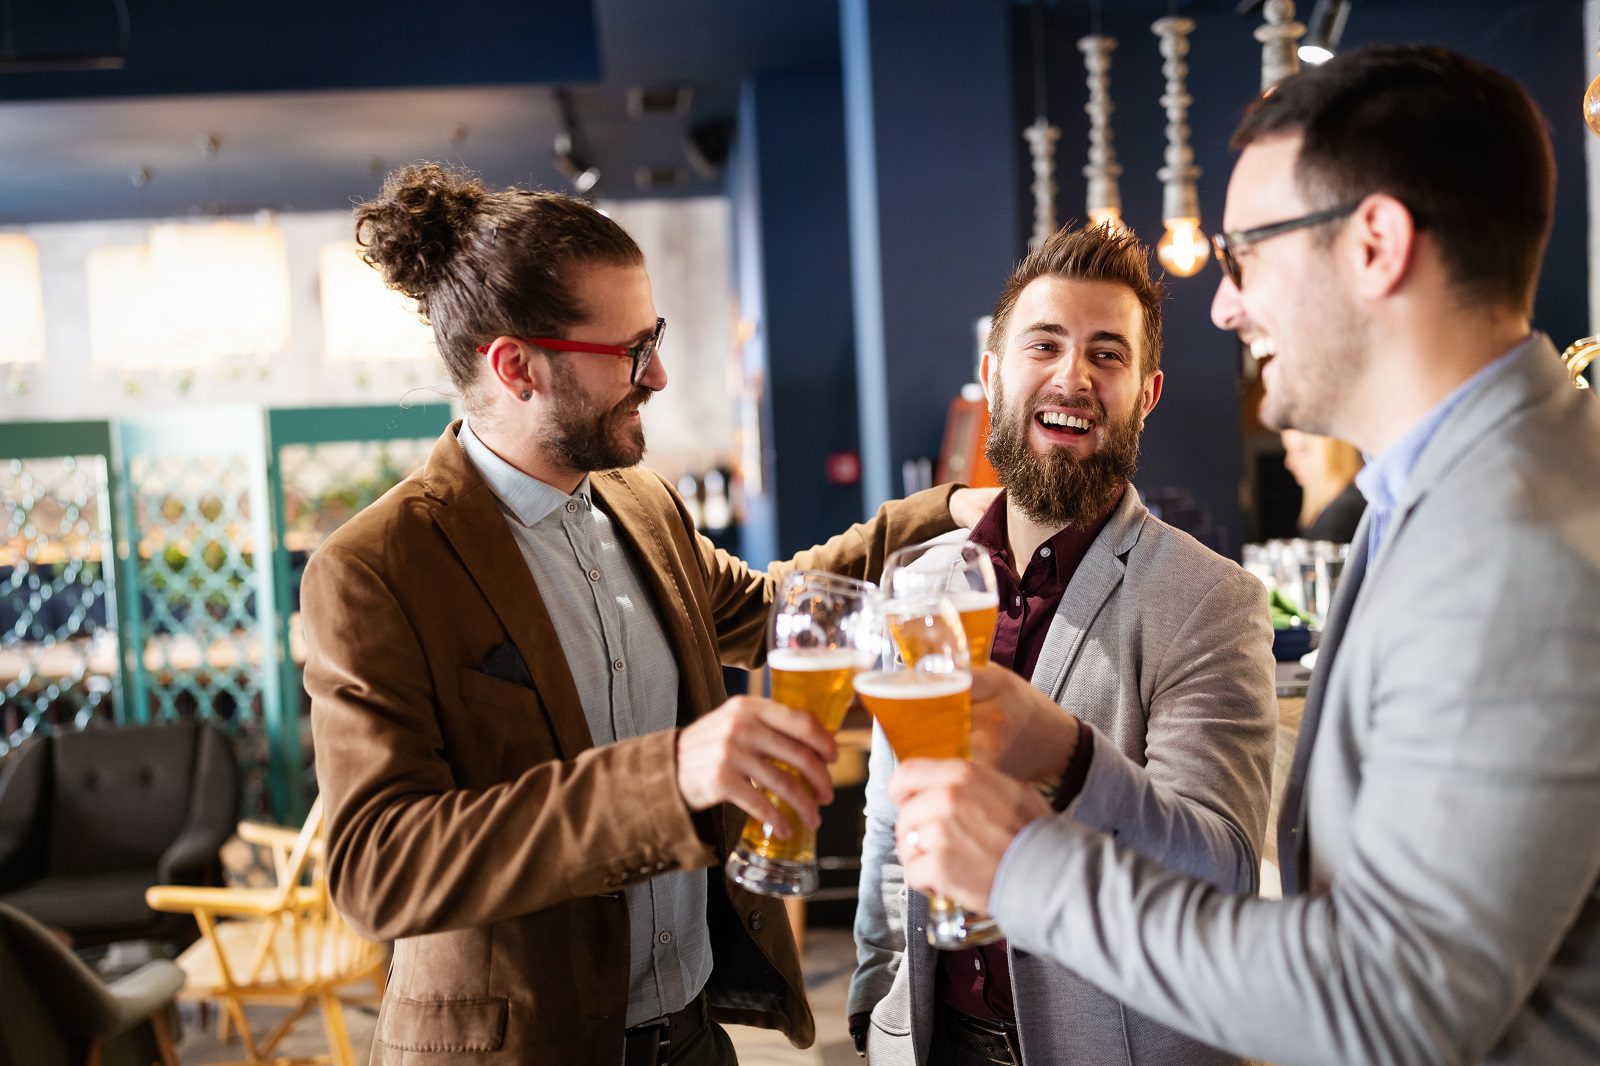 Featured image for “Seven Ways to Make Happy Hour Work for You and Your Guests”